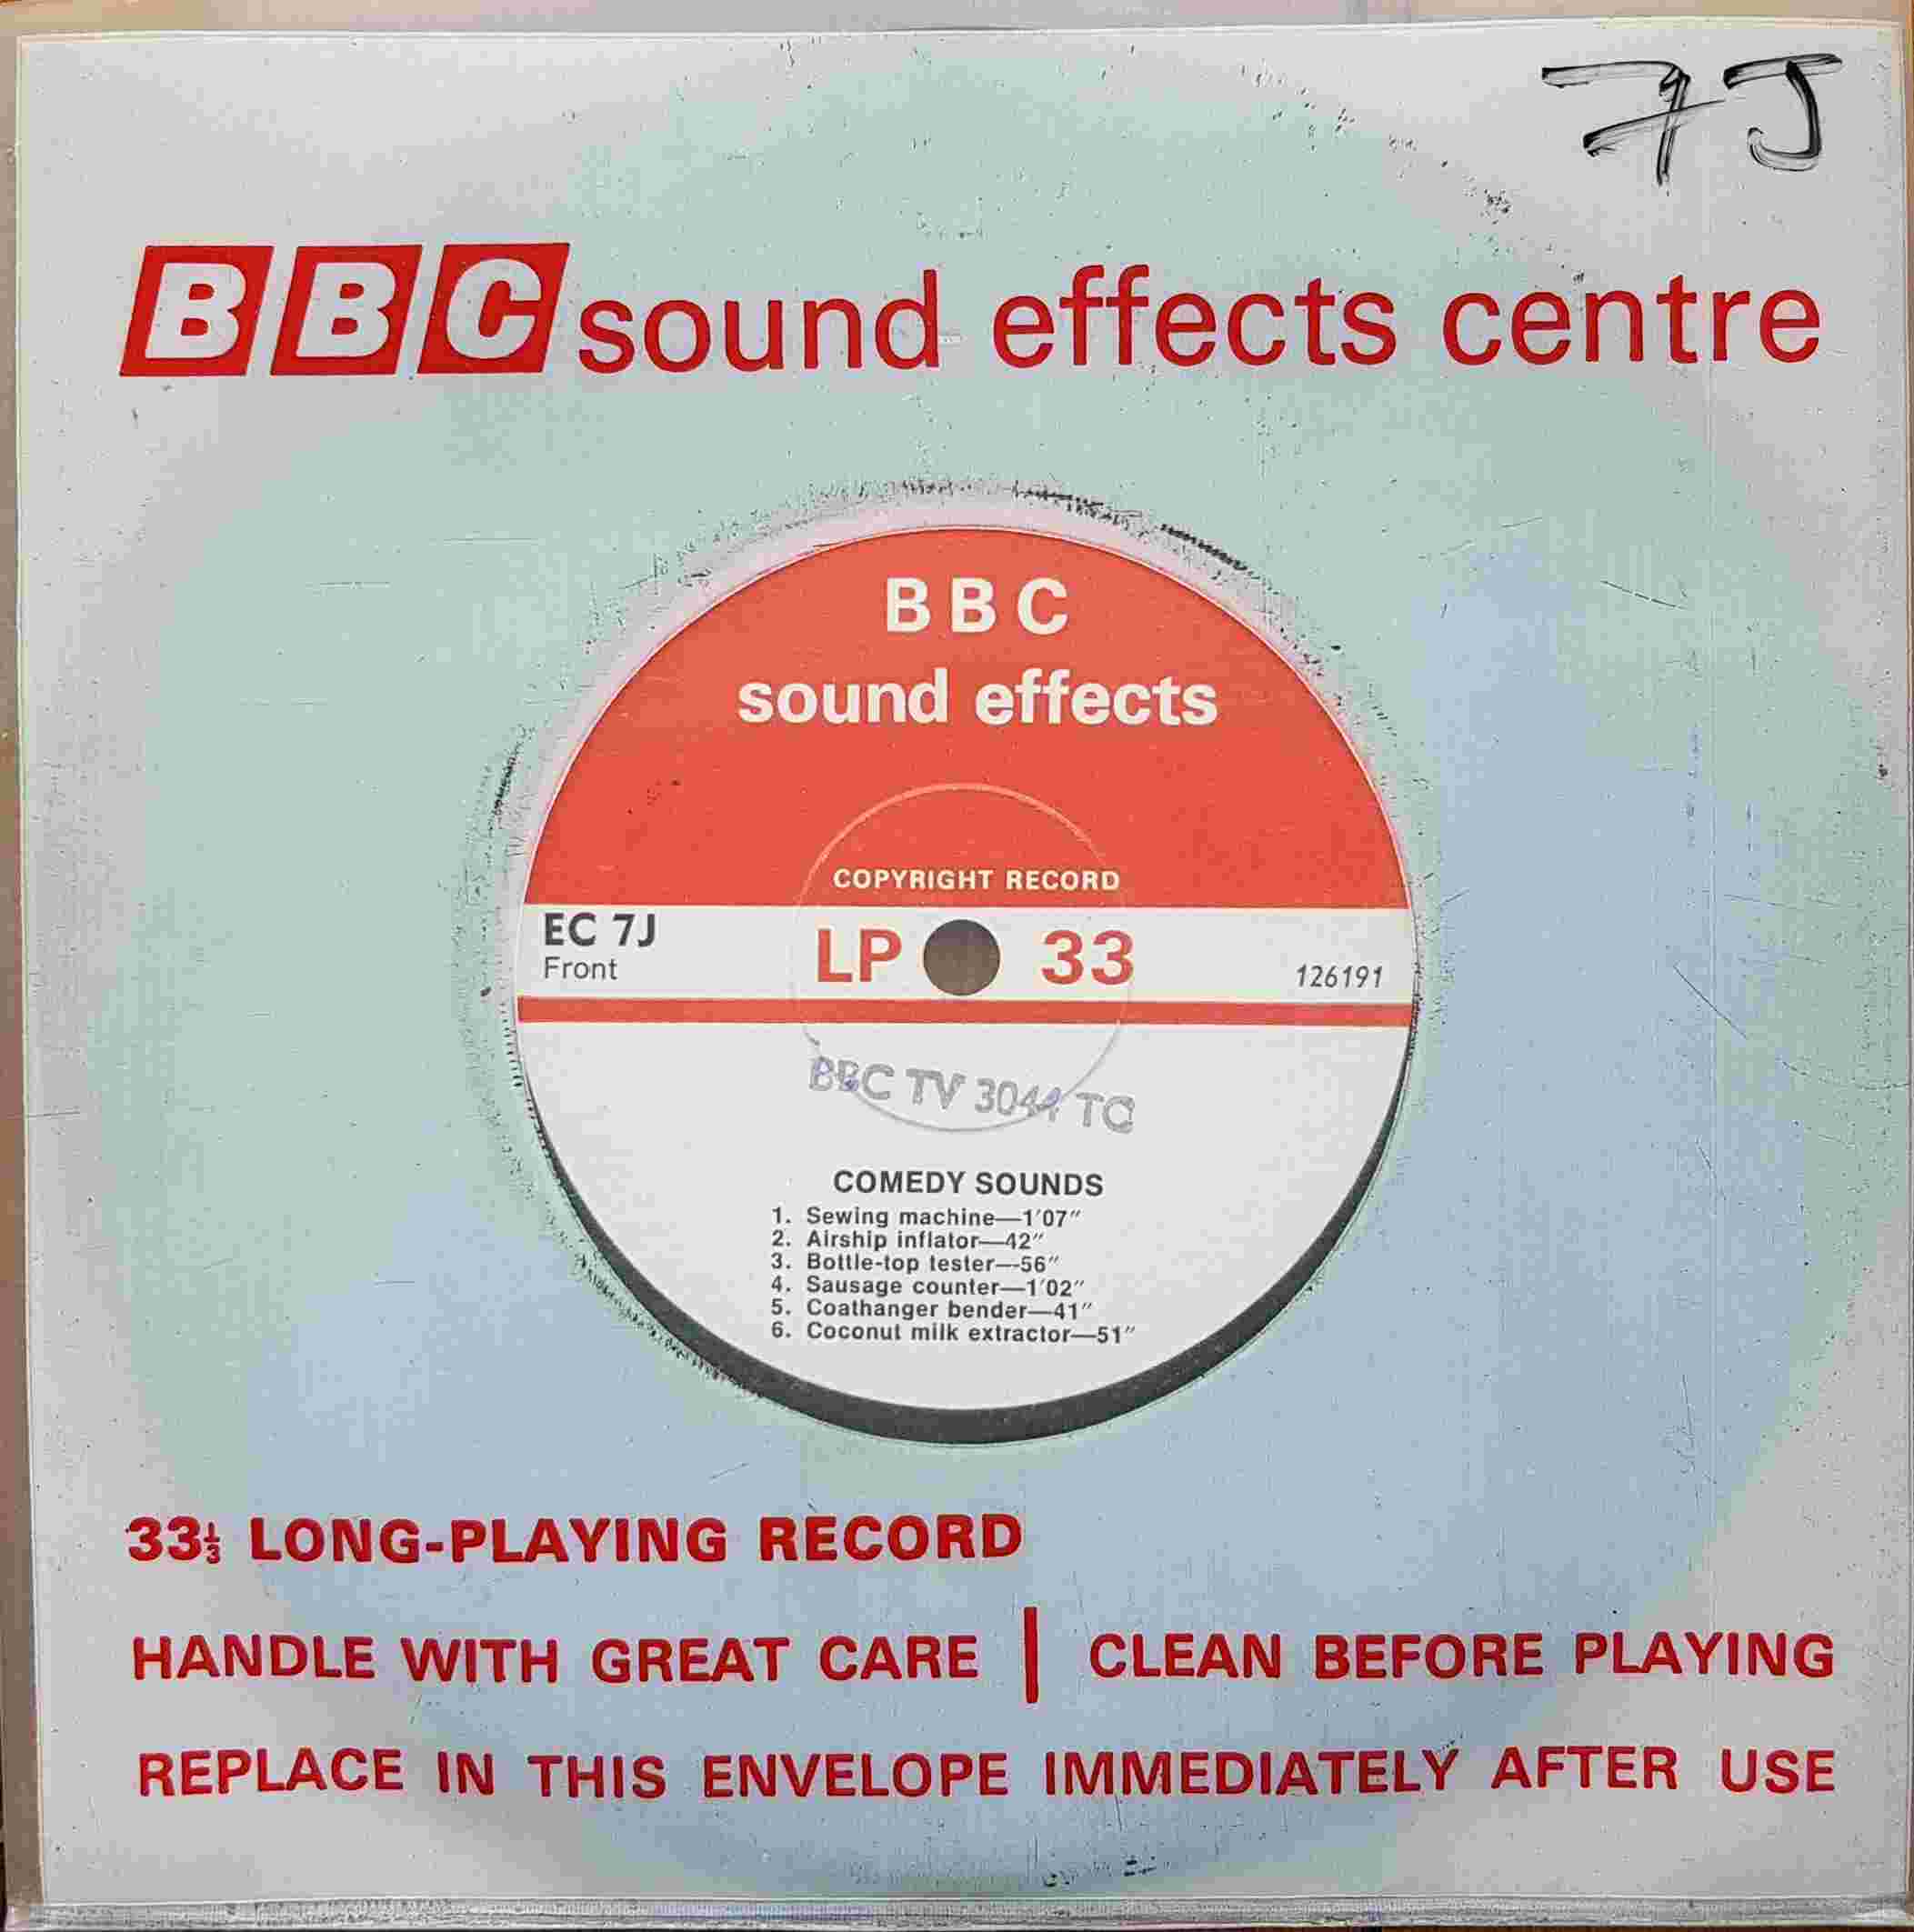 Picture of EC 7J Comedy sounds by artist Not registered from the BBC records and Tapes library